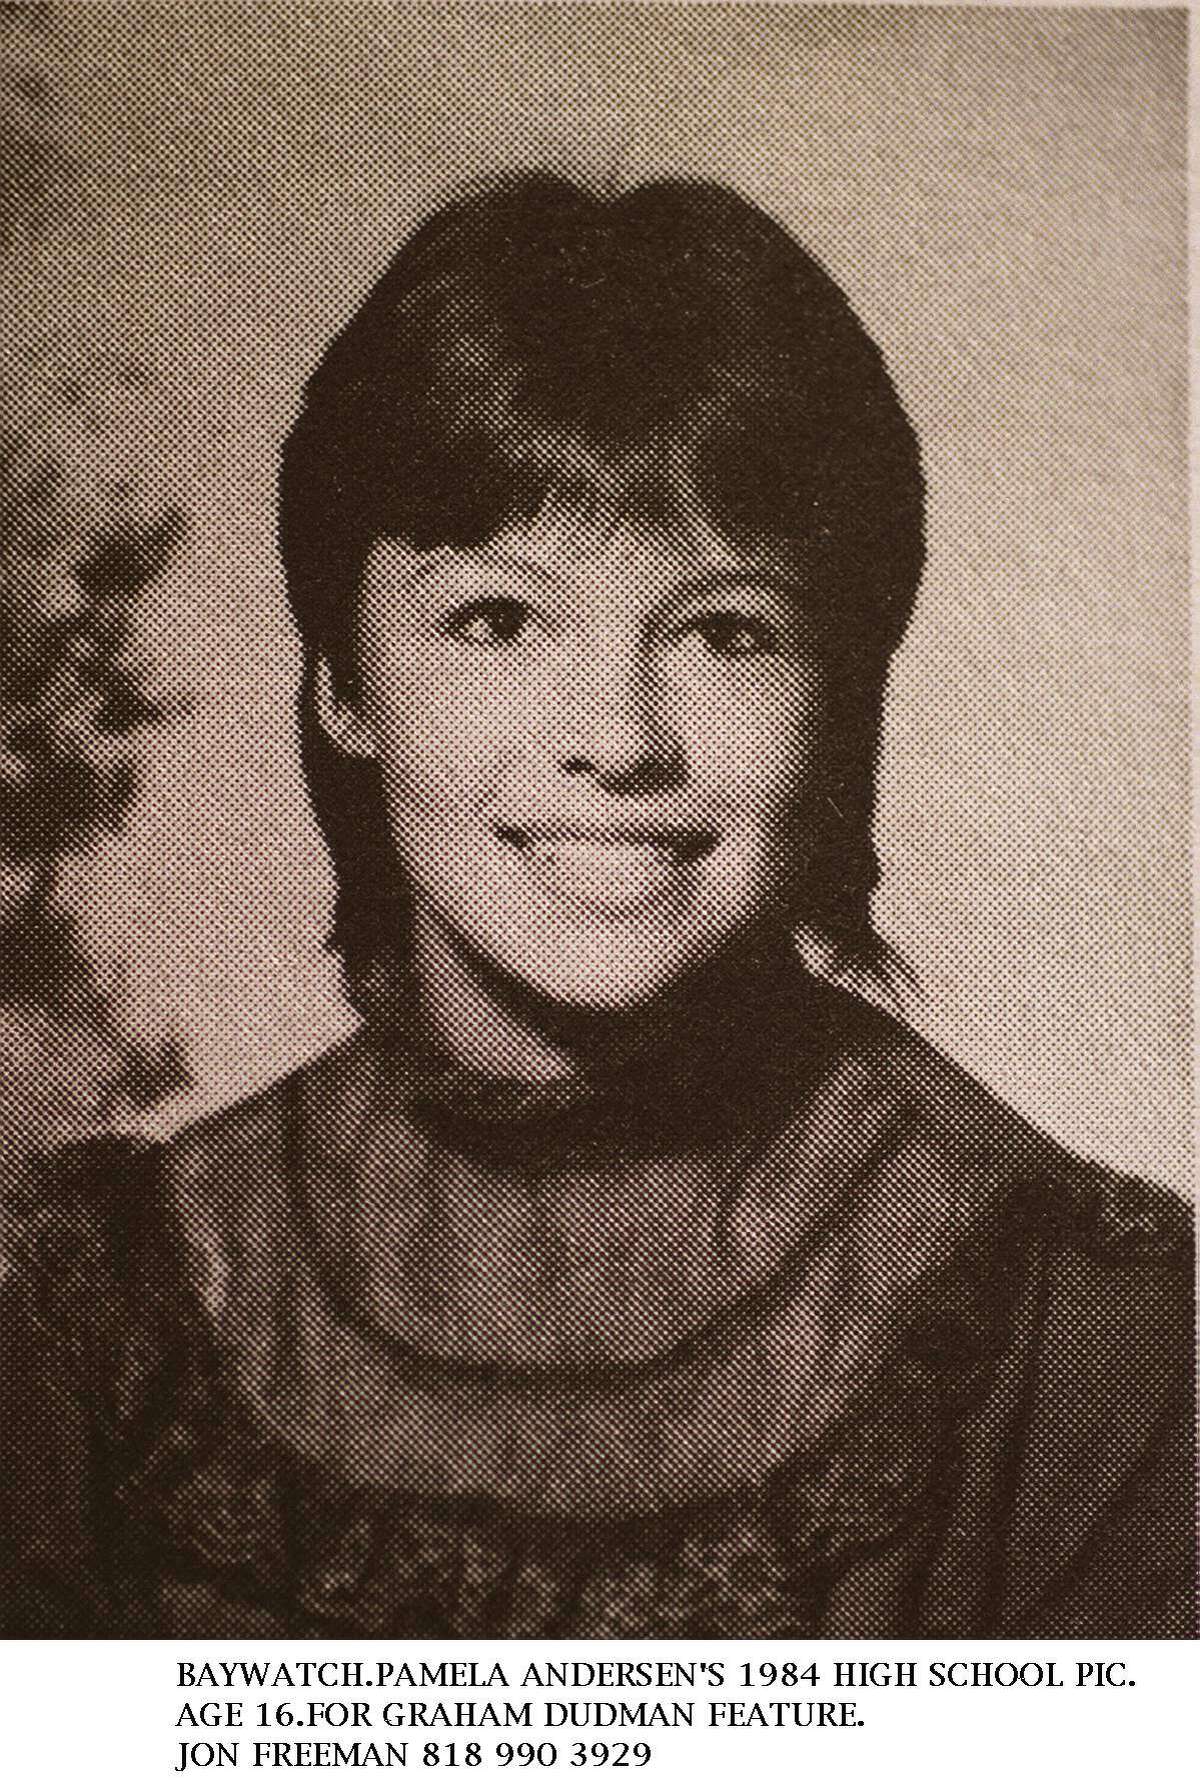 1984: Pamela Anderson poses for her 1984 high school yearbook in Canada.